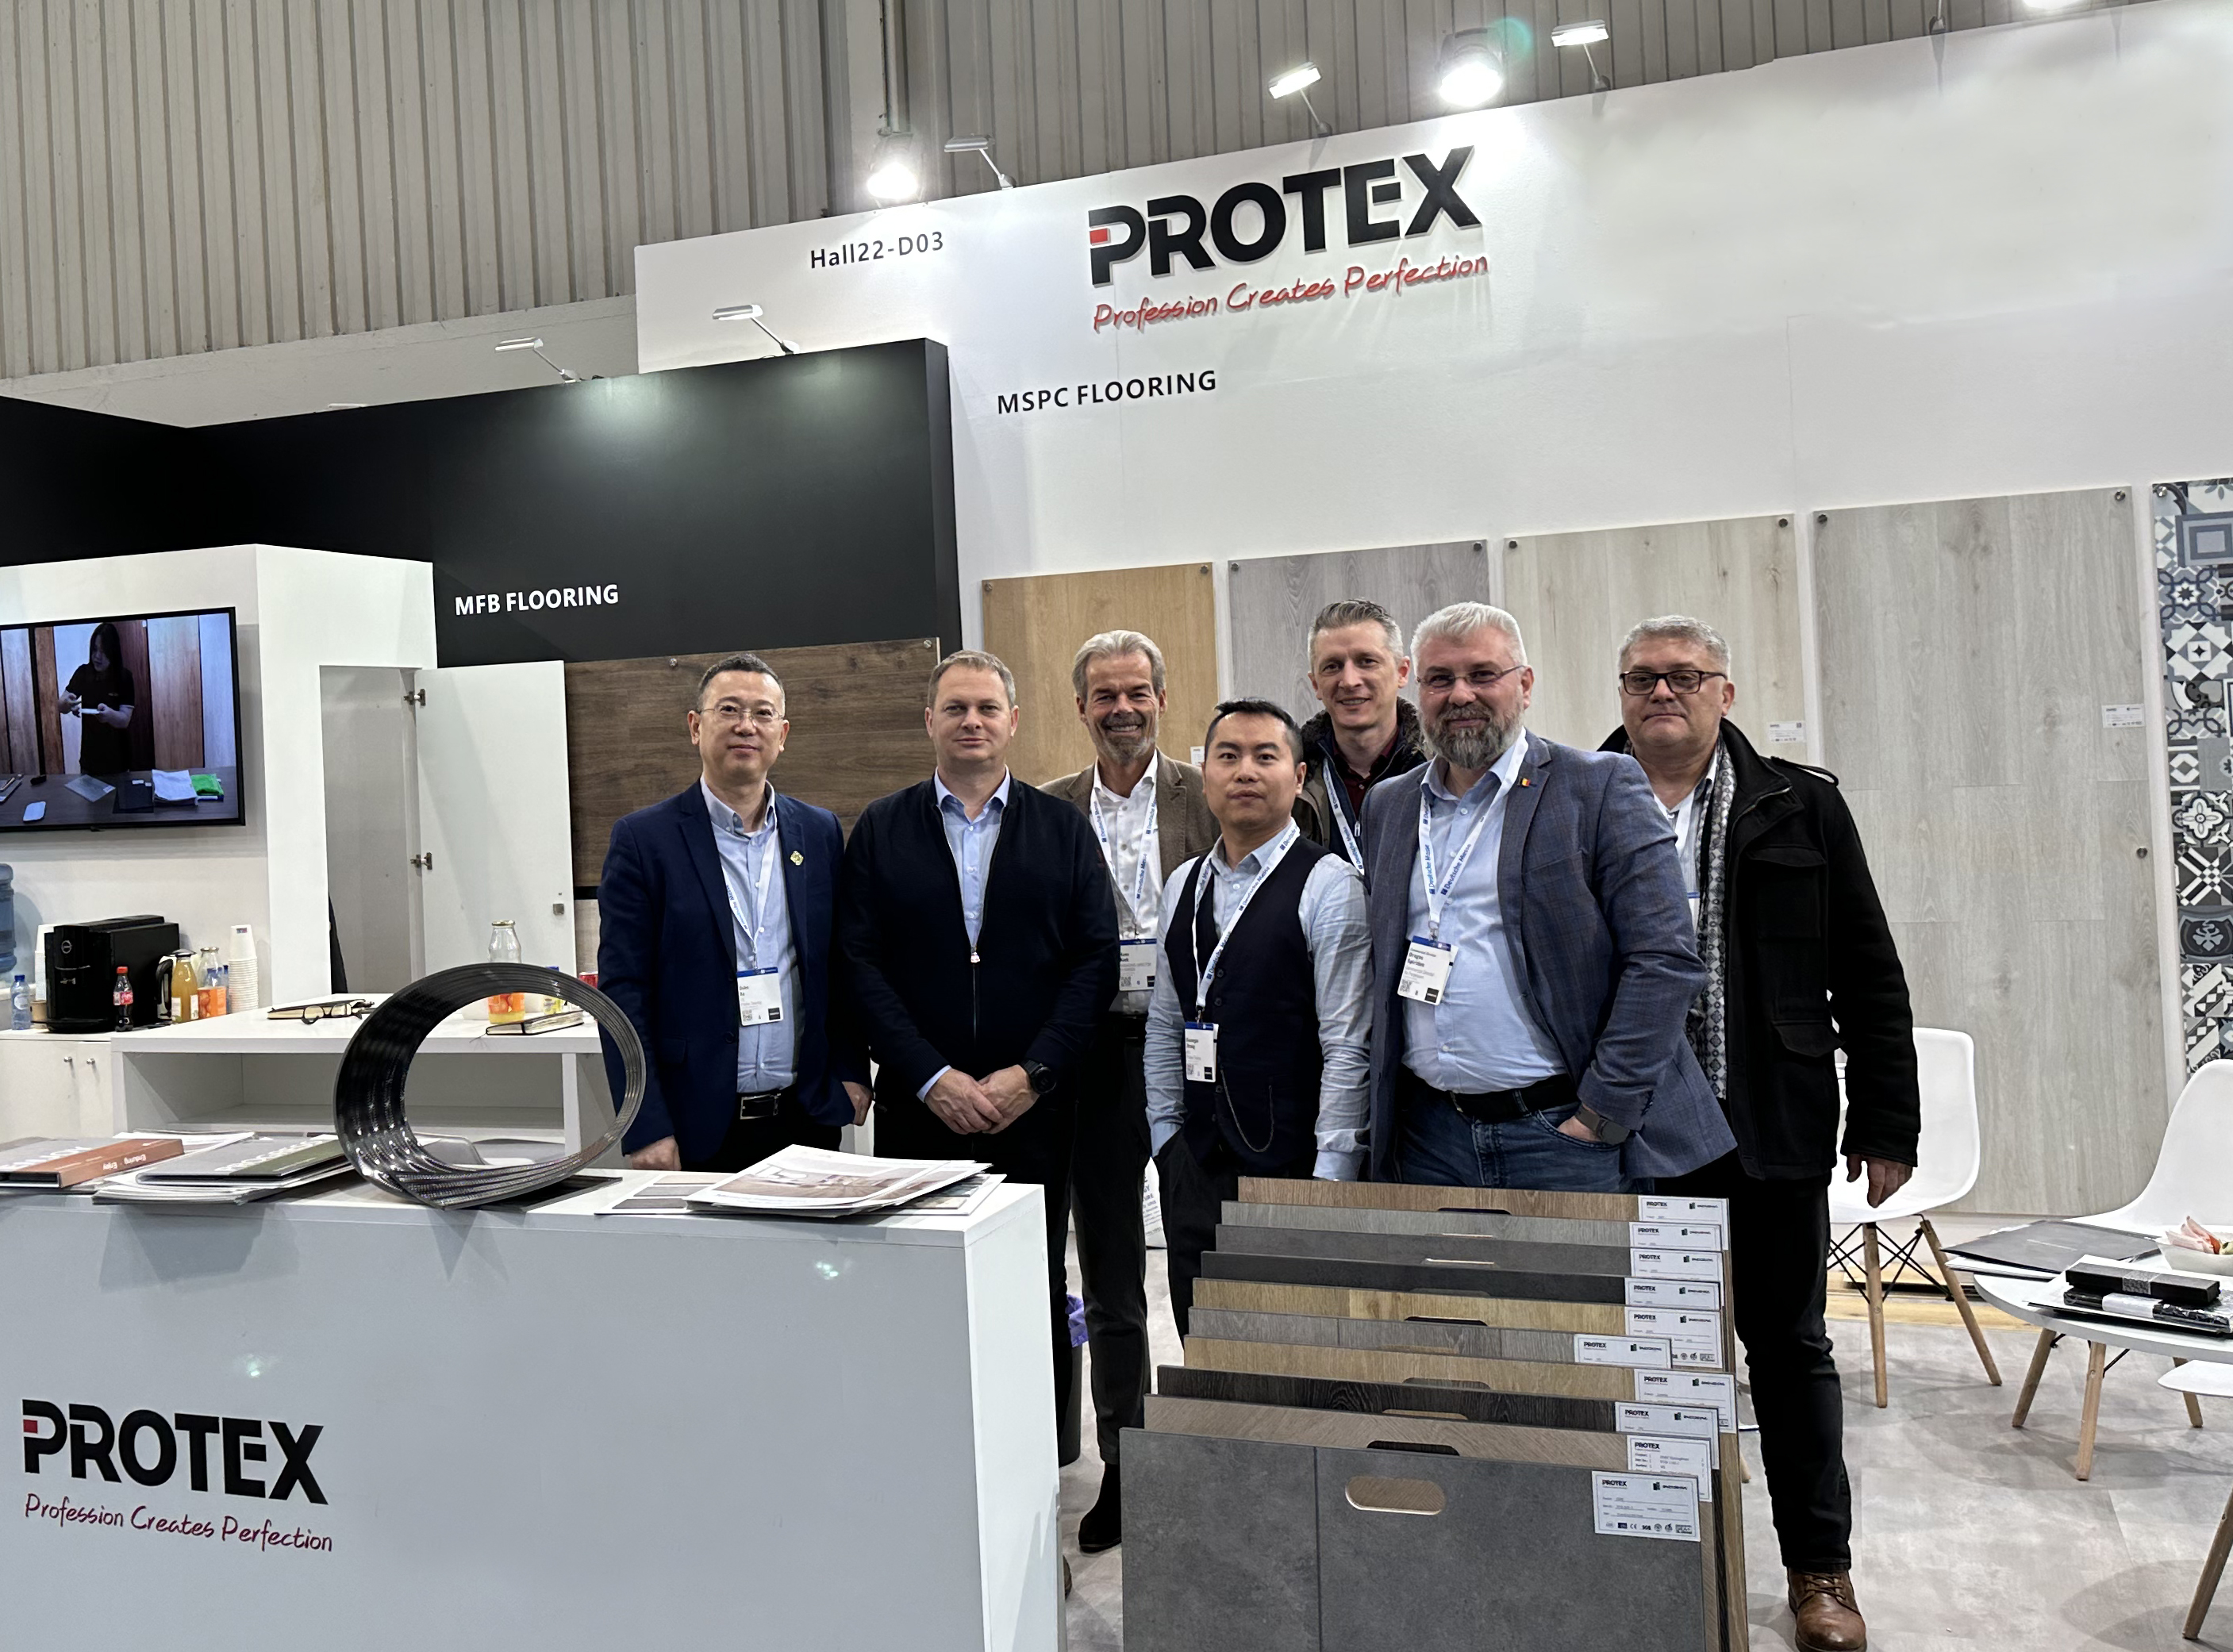 PROTEX FLOORING IN Domotex Hannover